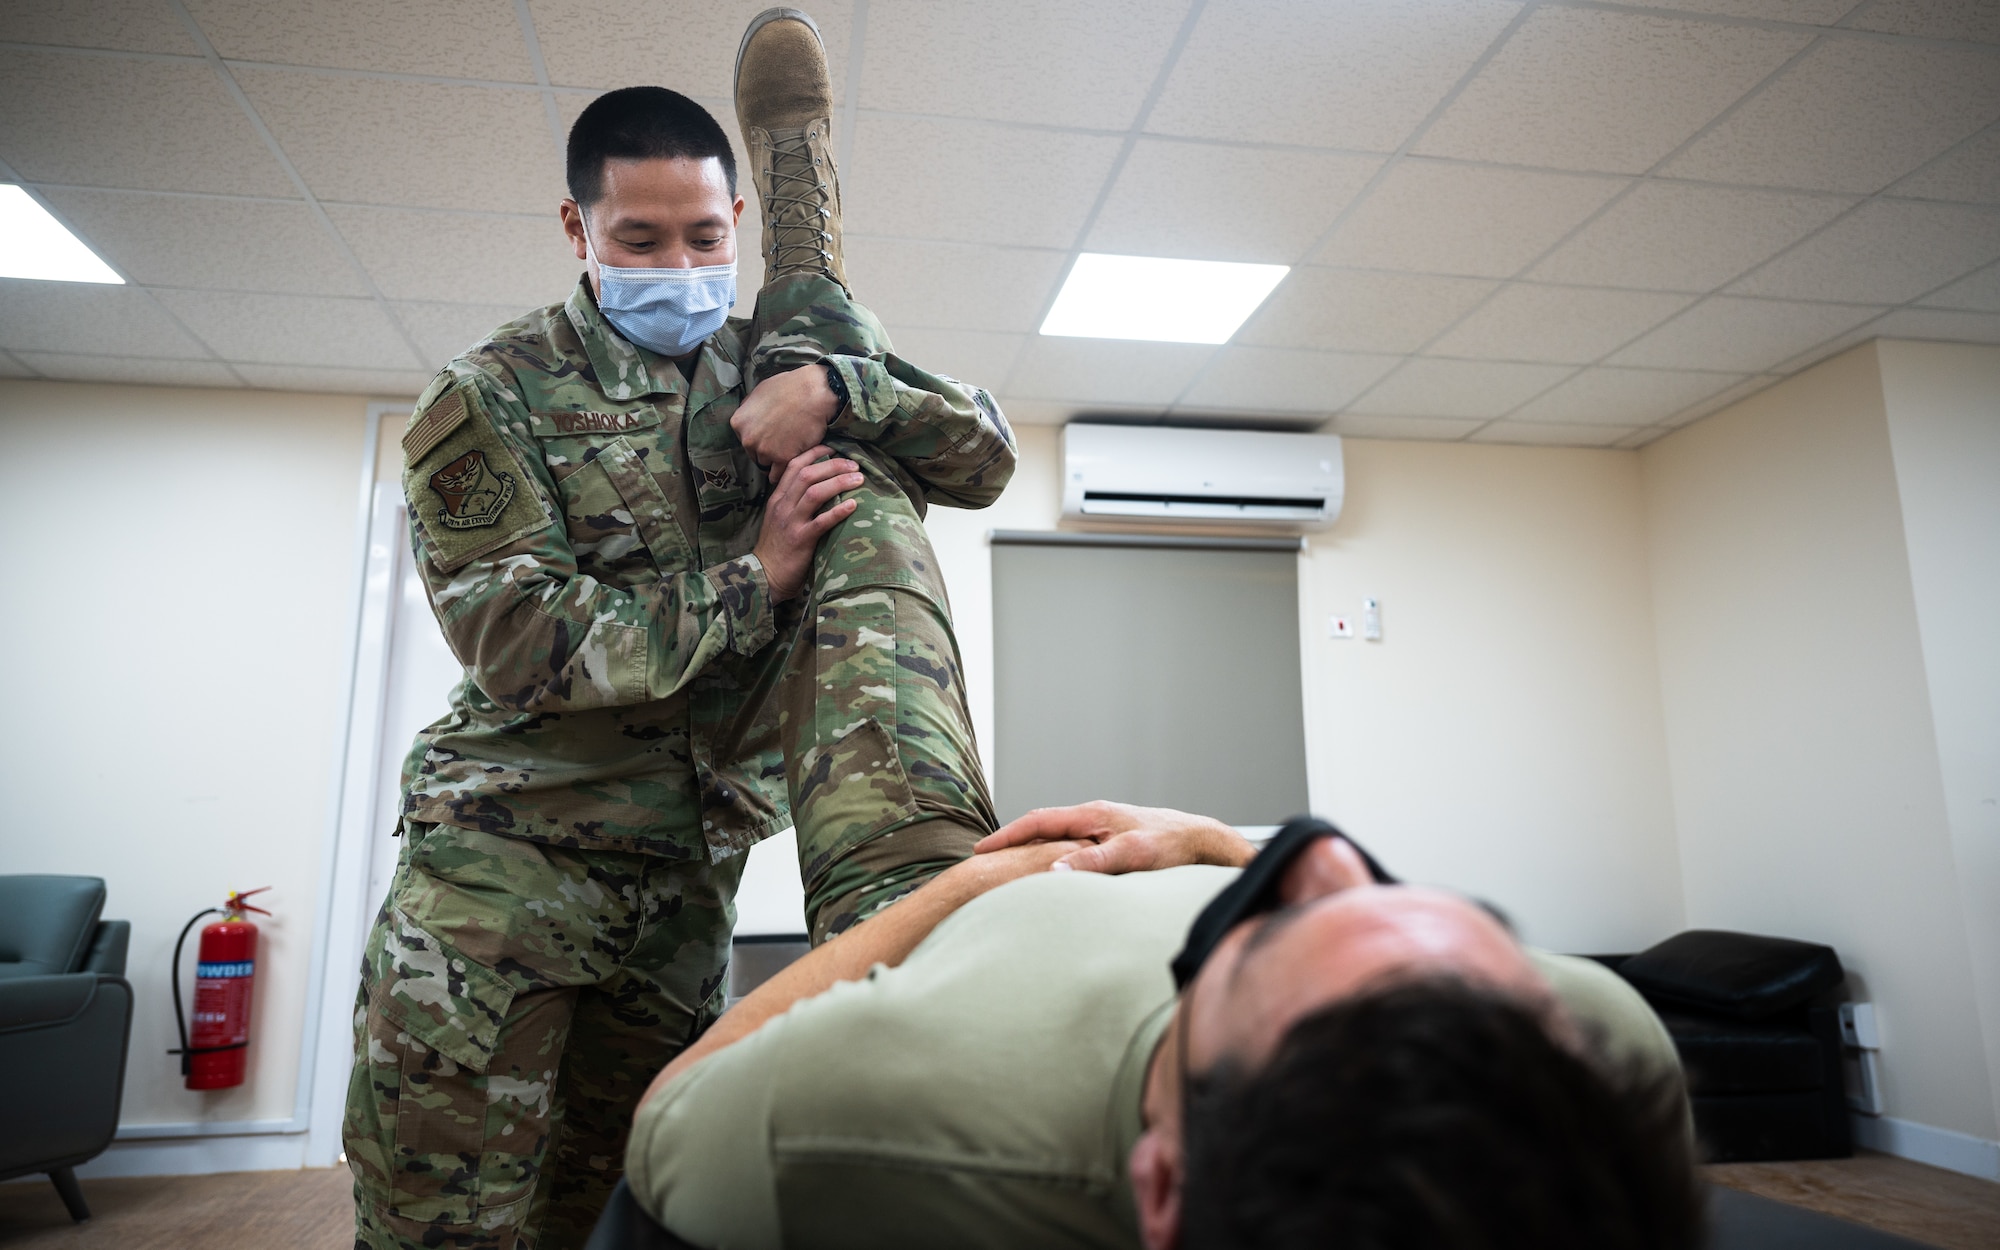 U.S. Air Force Senior Airman Koji Yoshioka, 378th Expeditionary Medical Group physical therapy technician, works with a patient at Prince Sultan Air Base, Kingdom of Saudi Arabia, Dec. 30, 2021. PSAB's physical therapy team provides traditional physical therapy, evaluations, manual therapy, and exercise therapy to service members deployed to the base. (U.S. Air Force photo by Senior Airman Jacob B. Wrightsman)